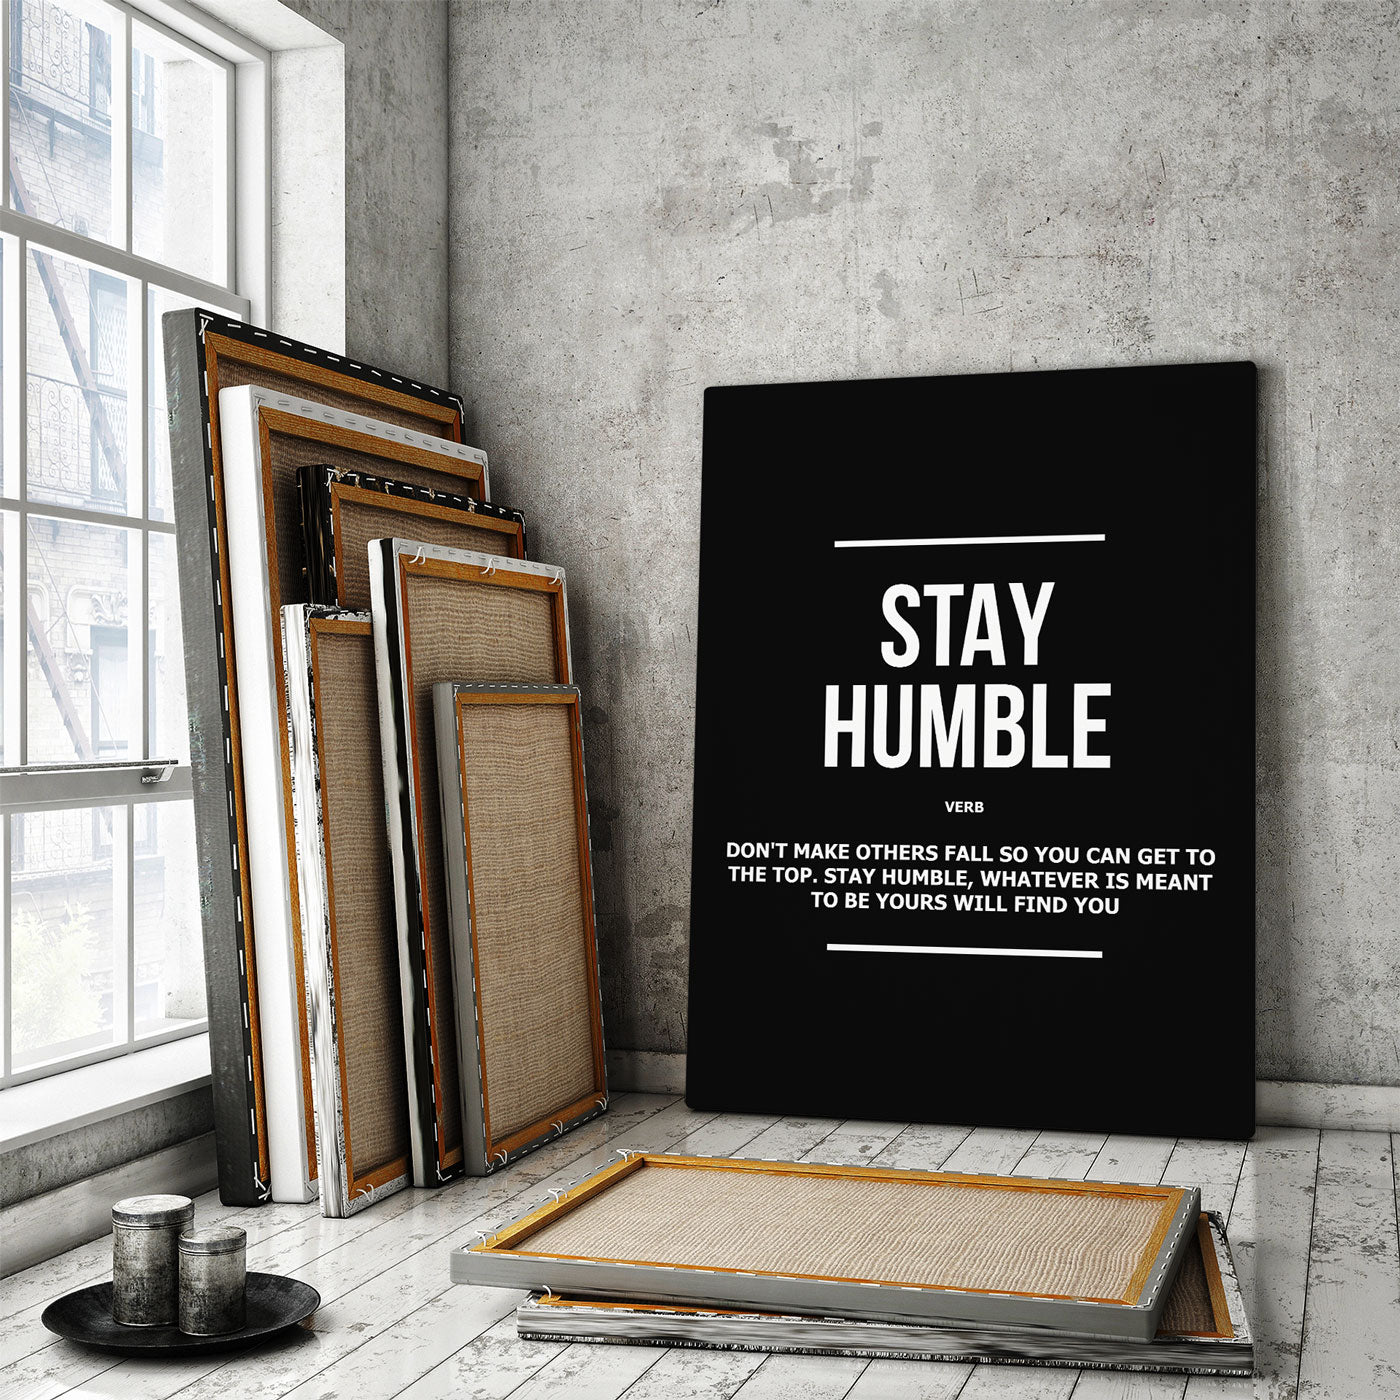 Stay Humble Verb